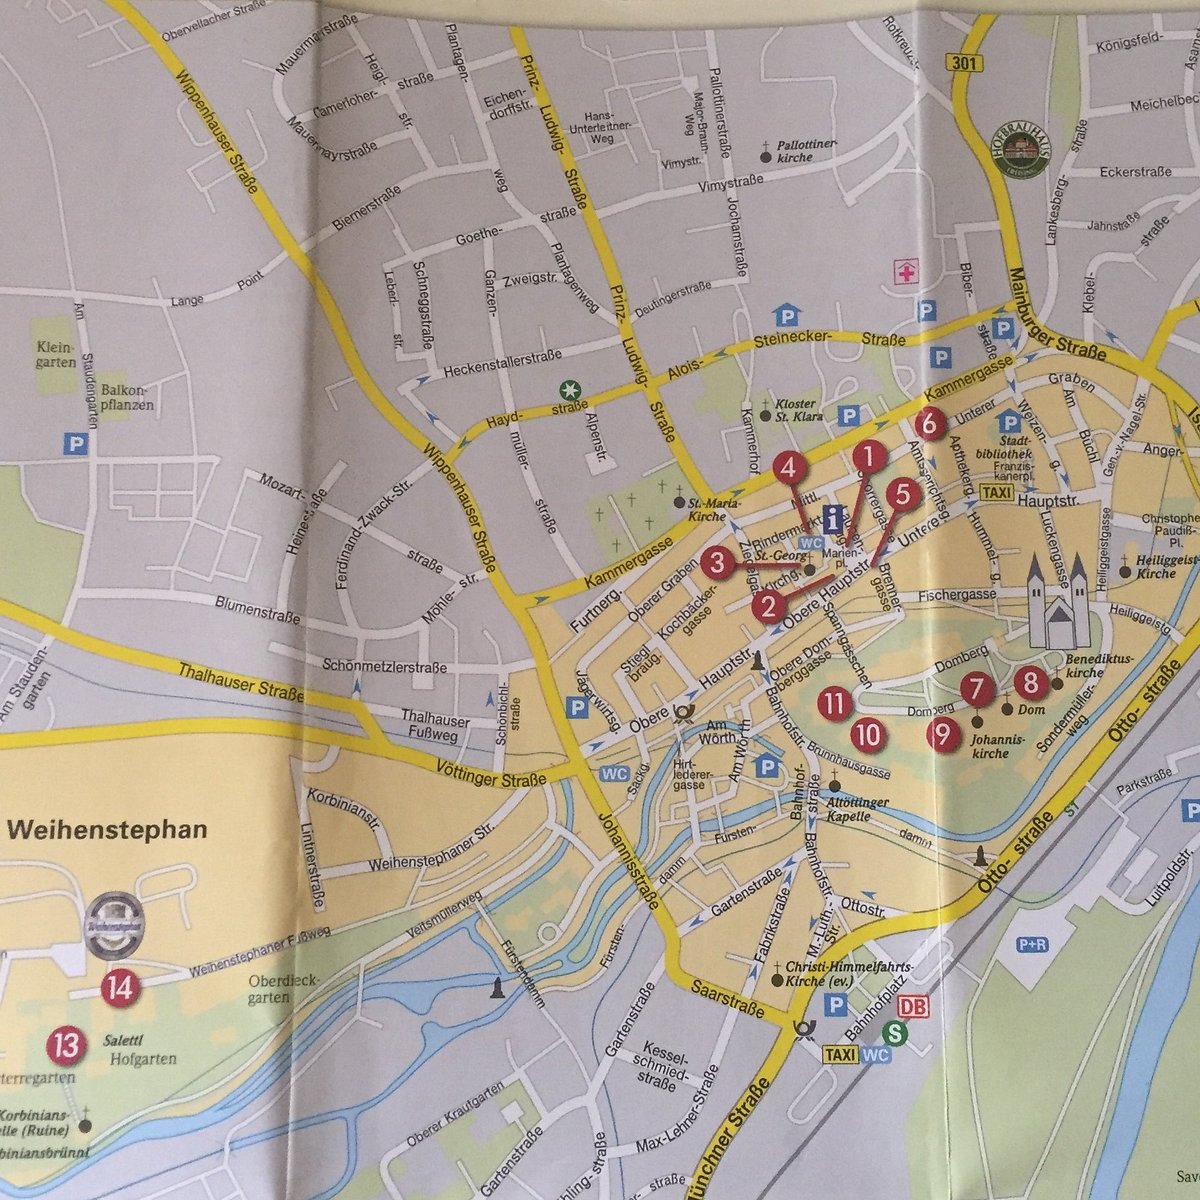 Touristinformation Stadt Freising - All You Need to Know BEFORE You Go